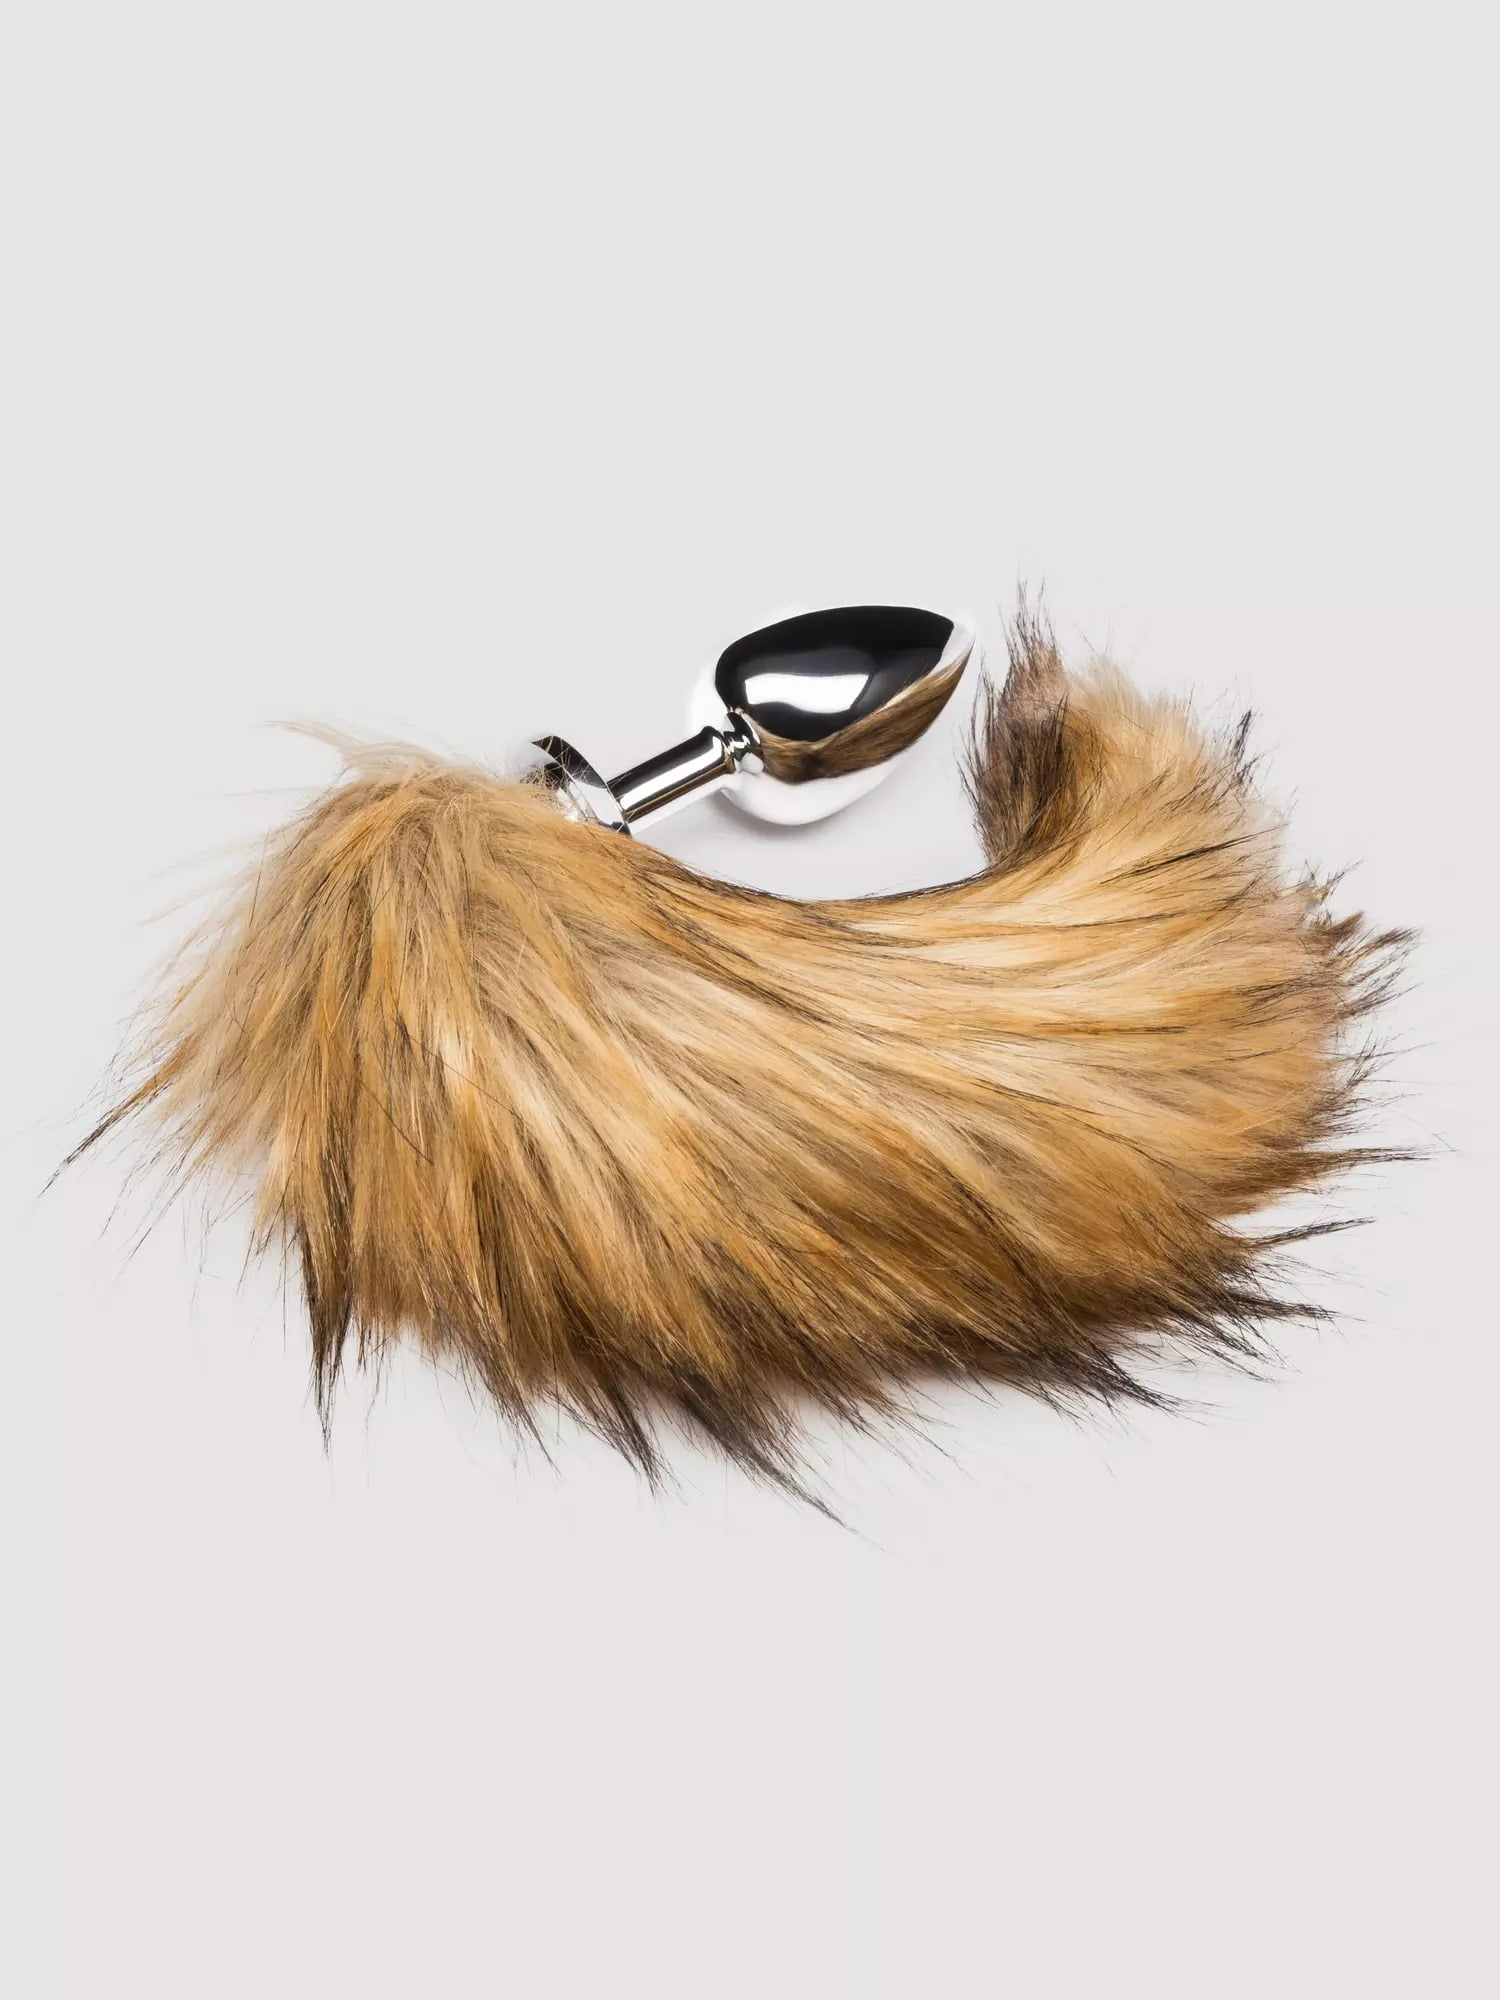 DOMINIX Large Stainless Steel Faux Fox Tail Butt Plug 4 Inch